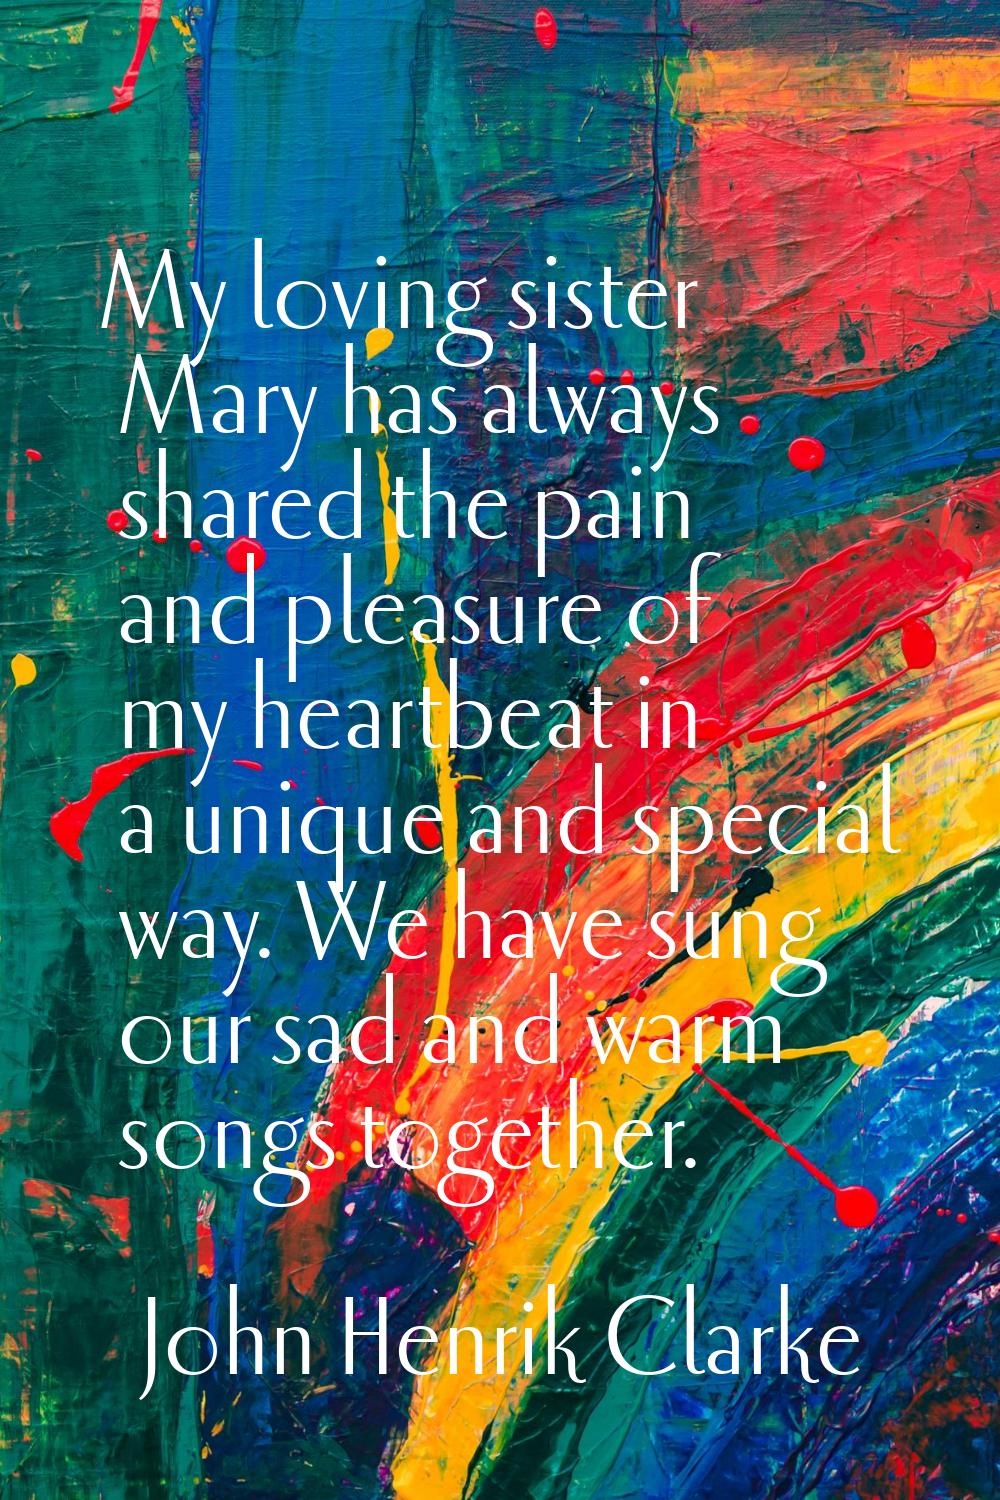 My loving sister Mary has always shared the pain and pleasure of my heartbeat in a unique and speci